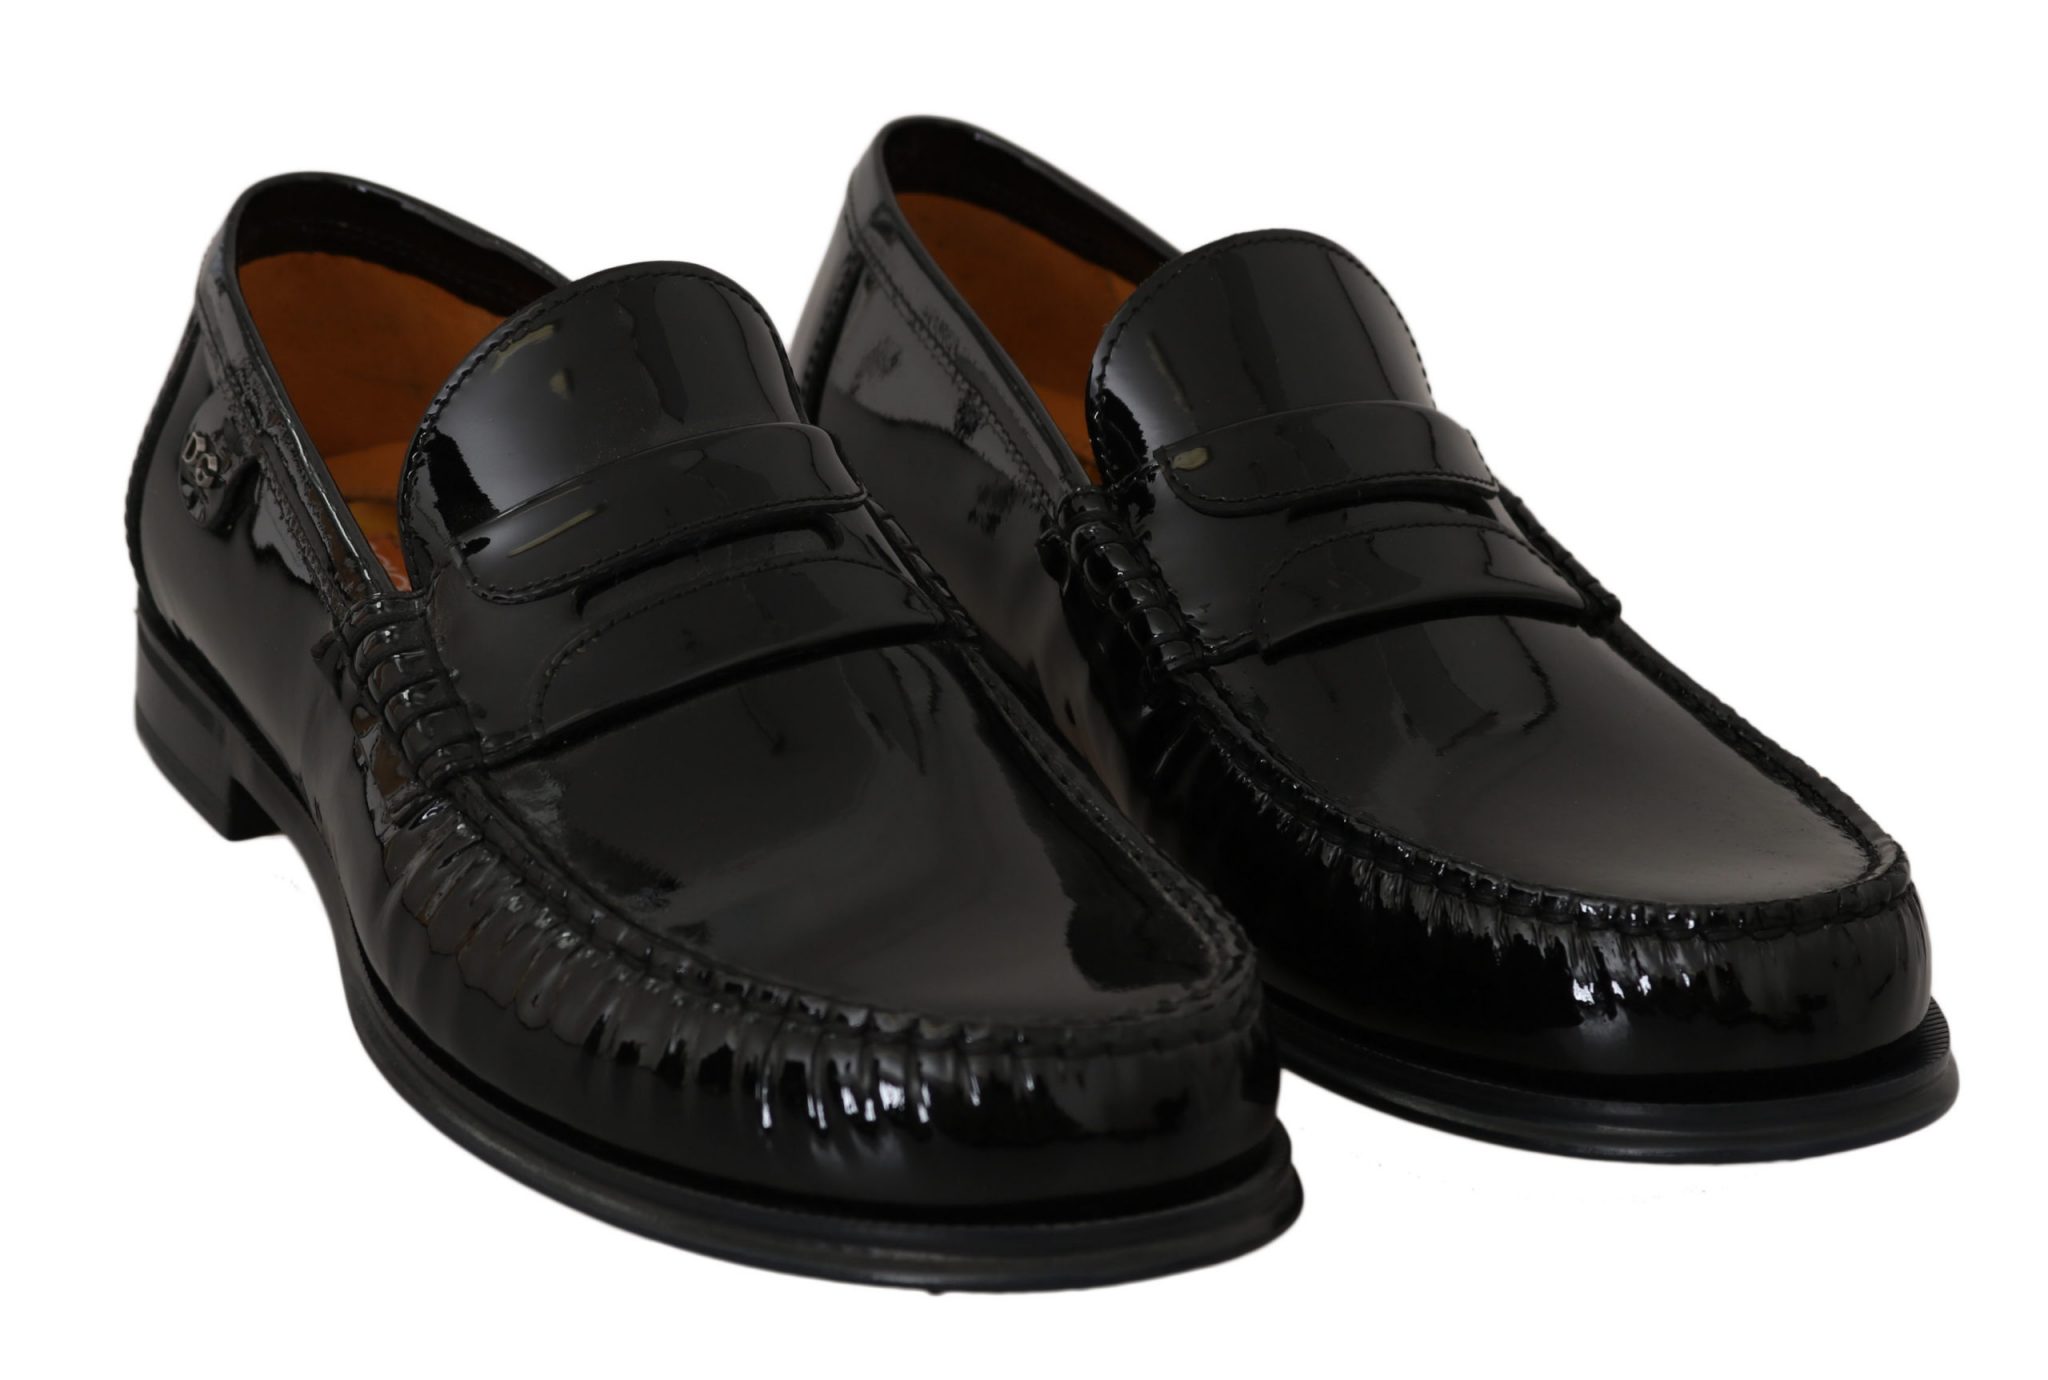 Black Patent Leather Moccasins Dress Shoes - Youarrived